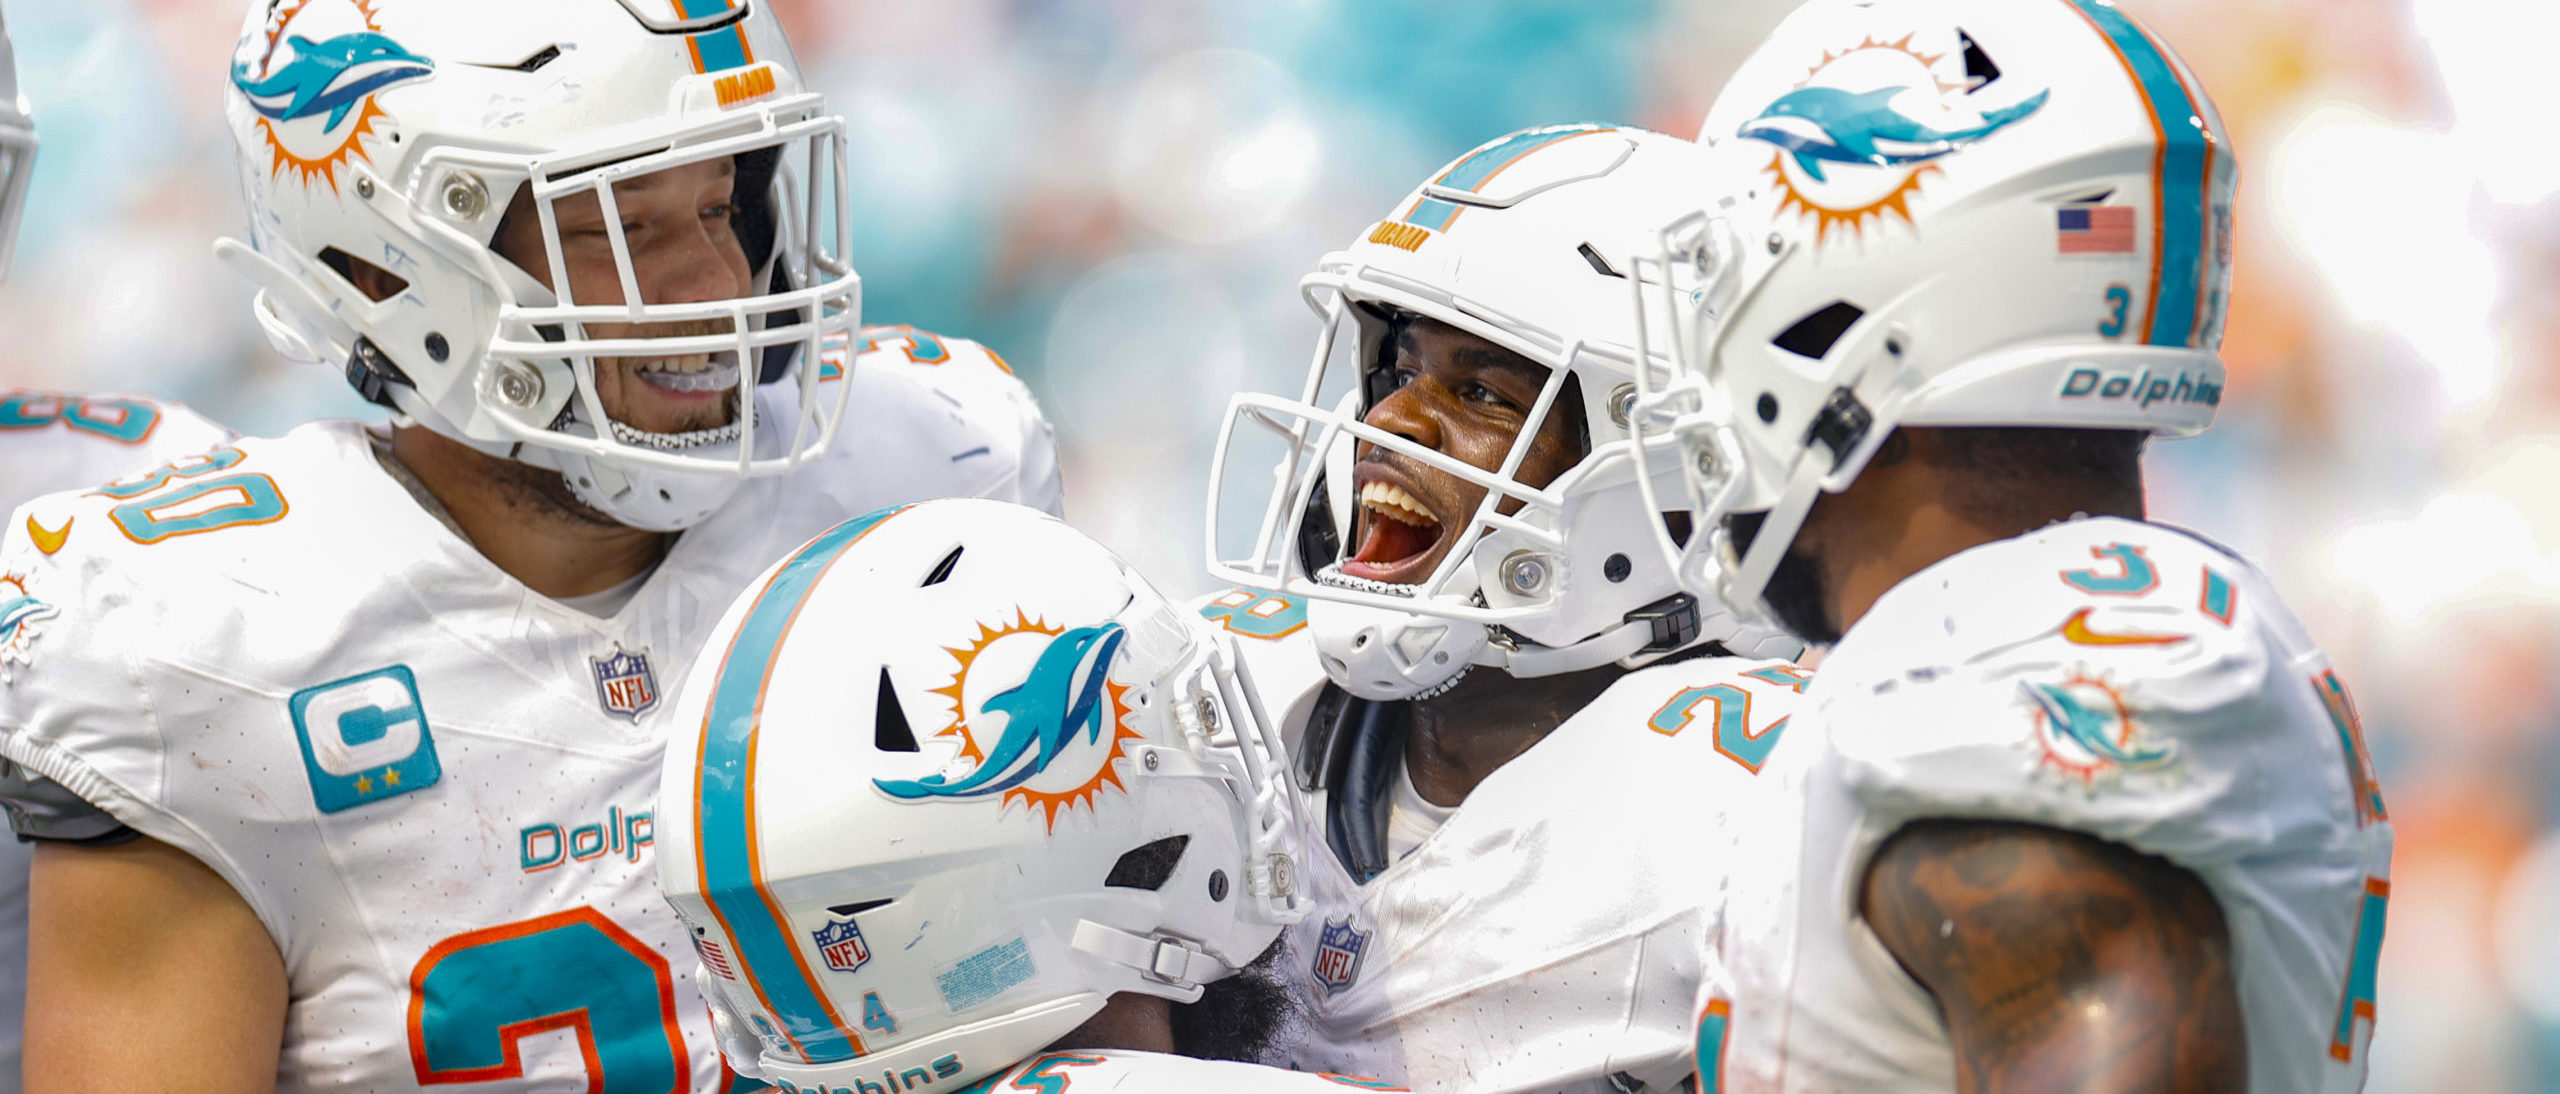 nfl packers dolphins